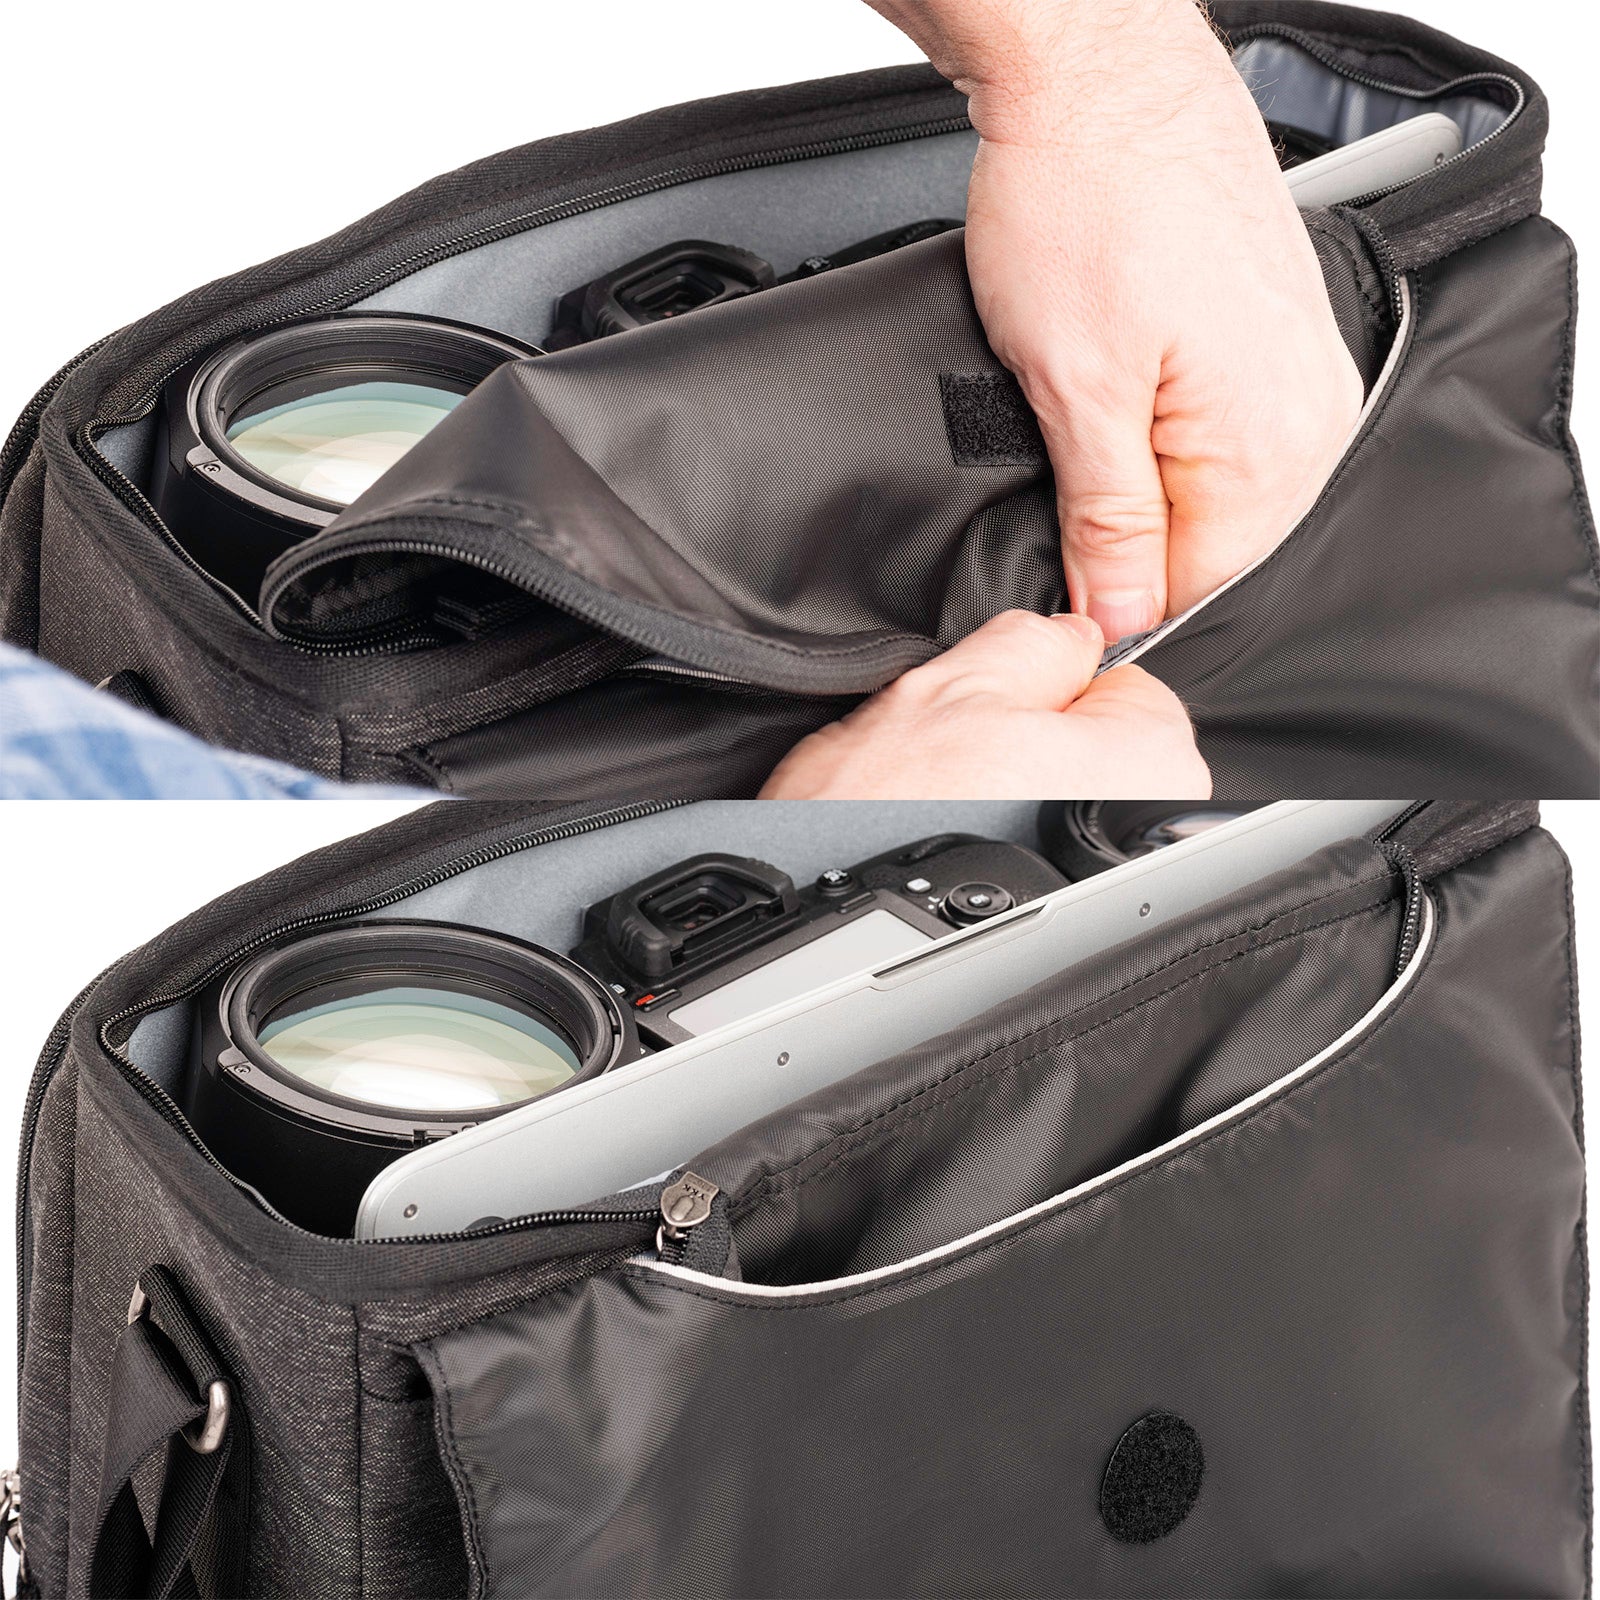 Interior zippered flap provides a secure closure, weather barrier and protection from theft. Tucks away when not in use.